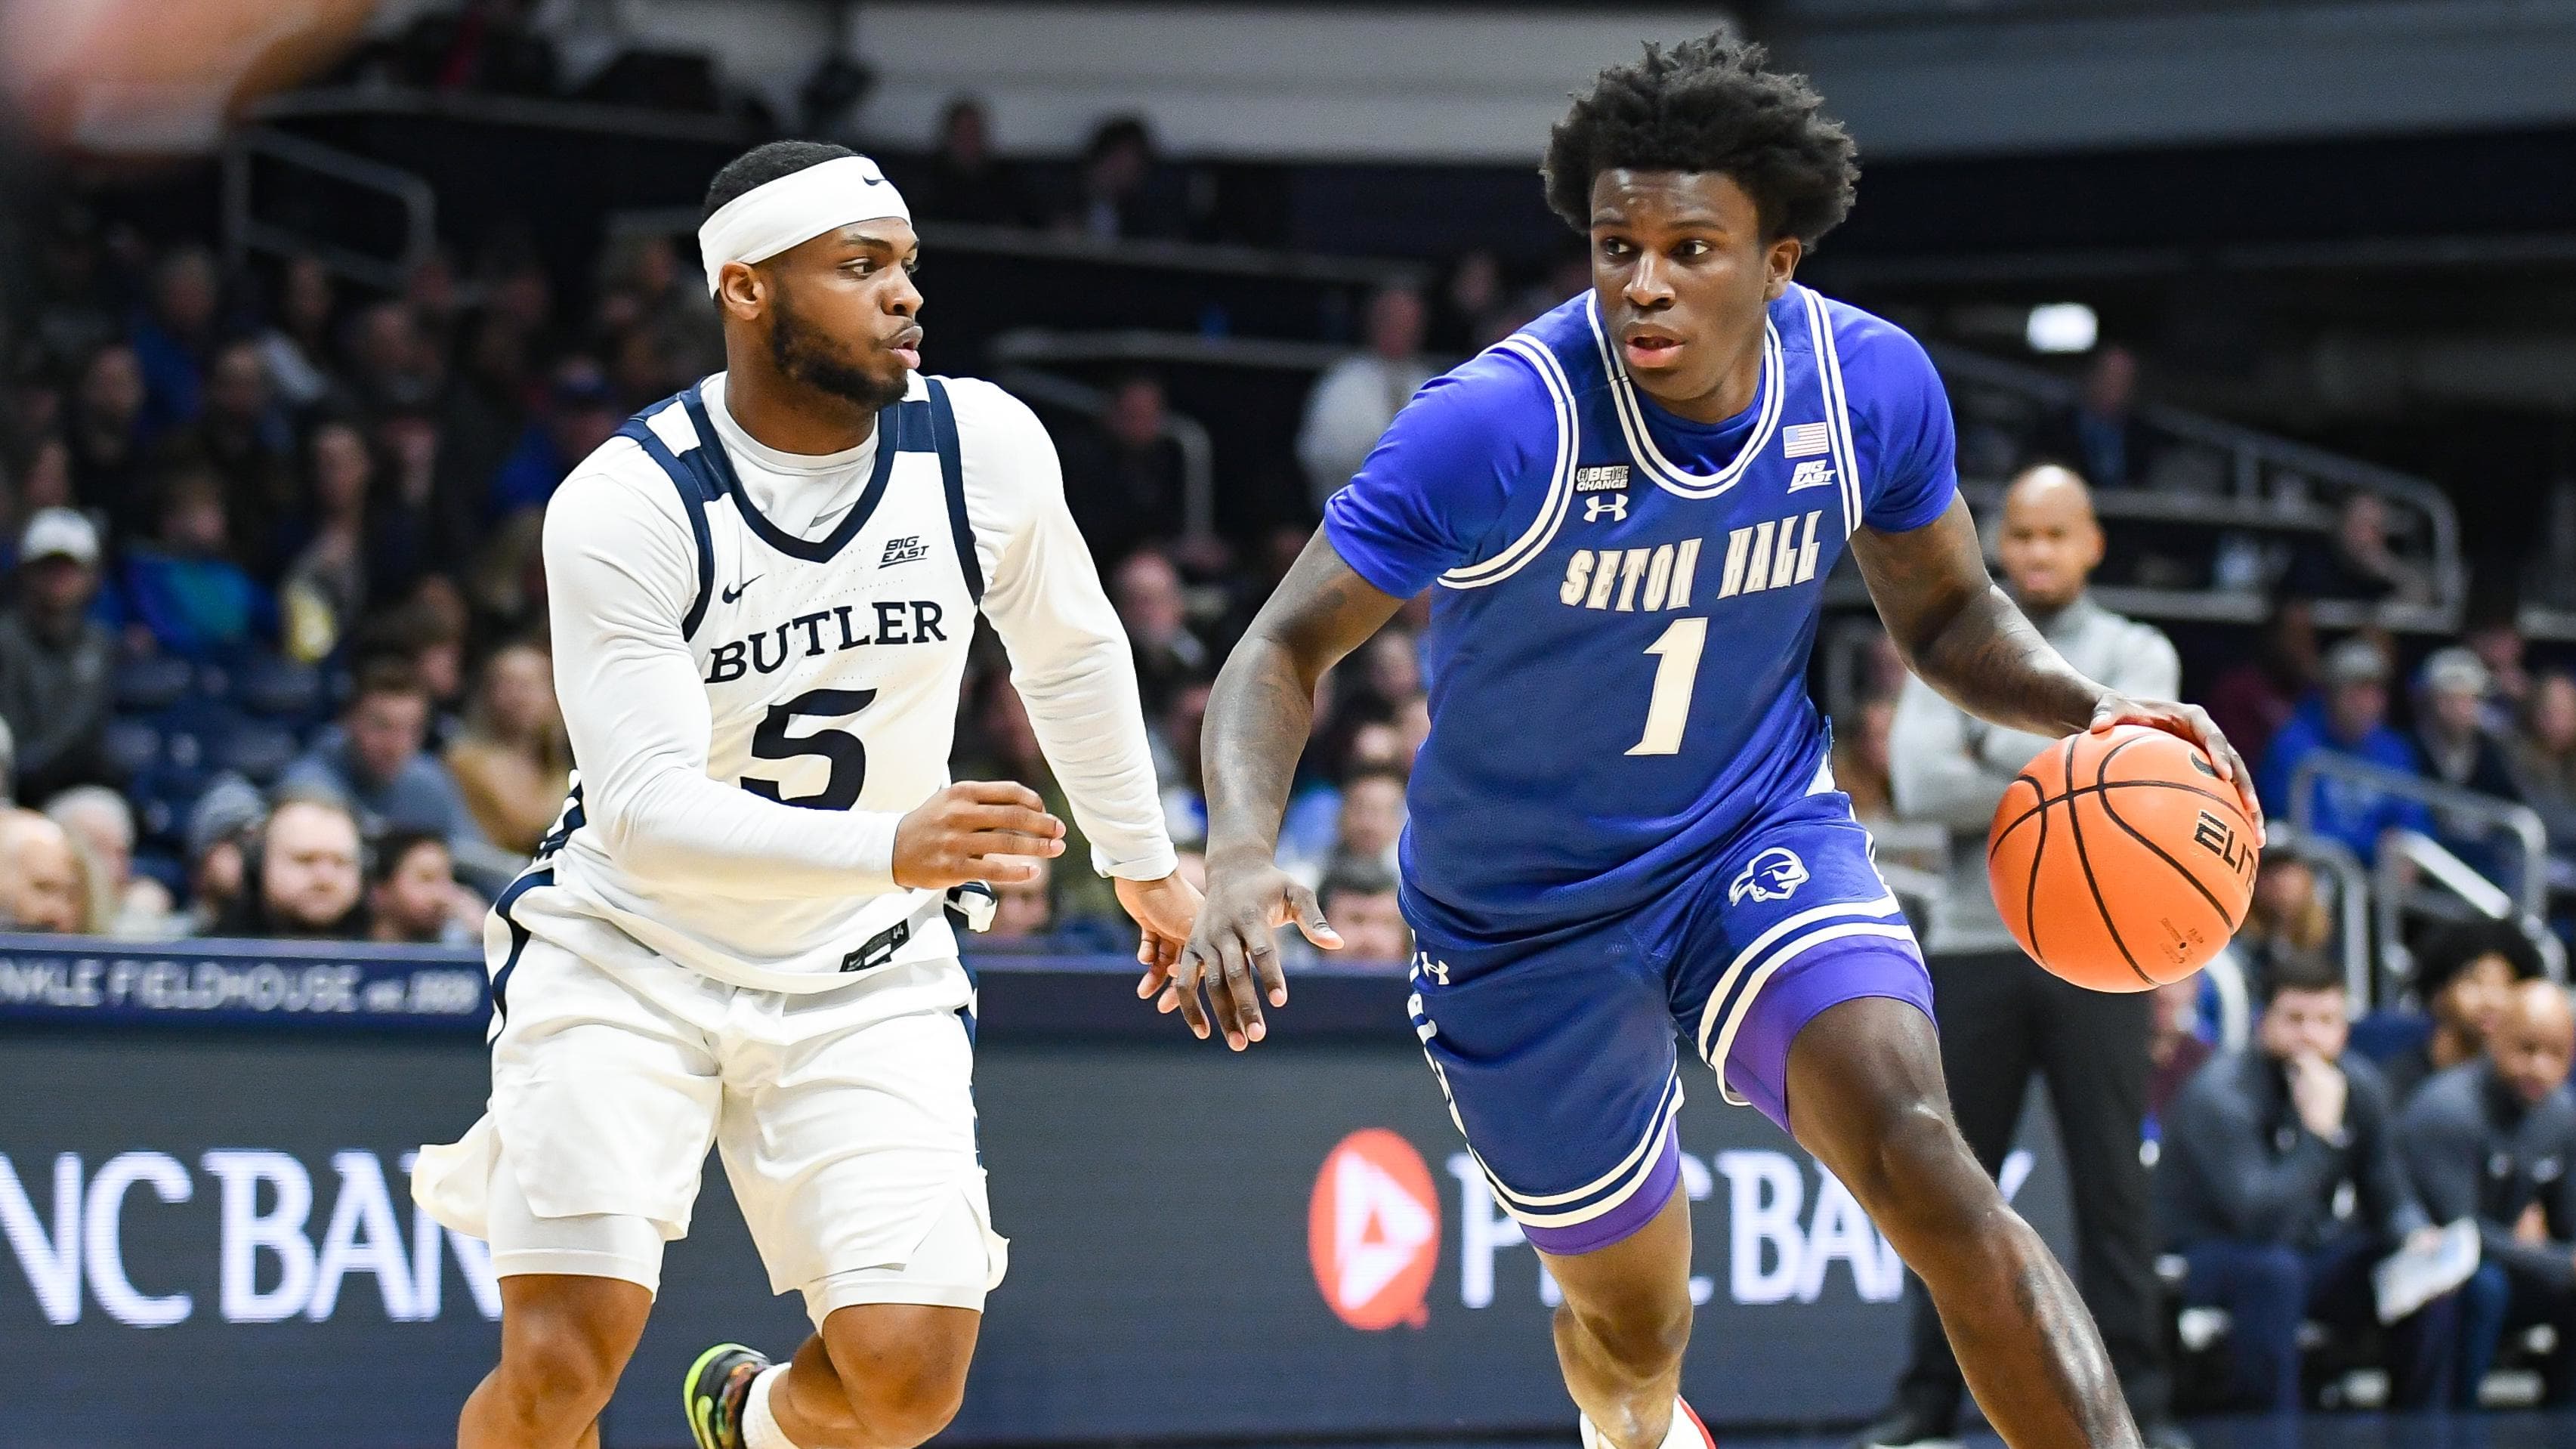 Ranking the 20 Best Men’s College Basketball Players in the Transfer Portal